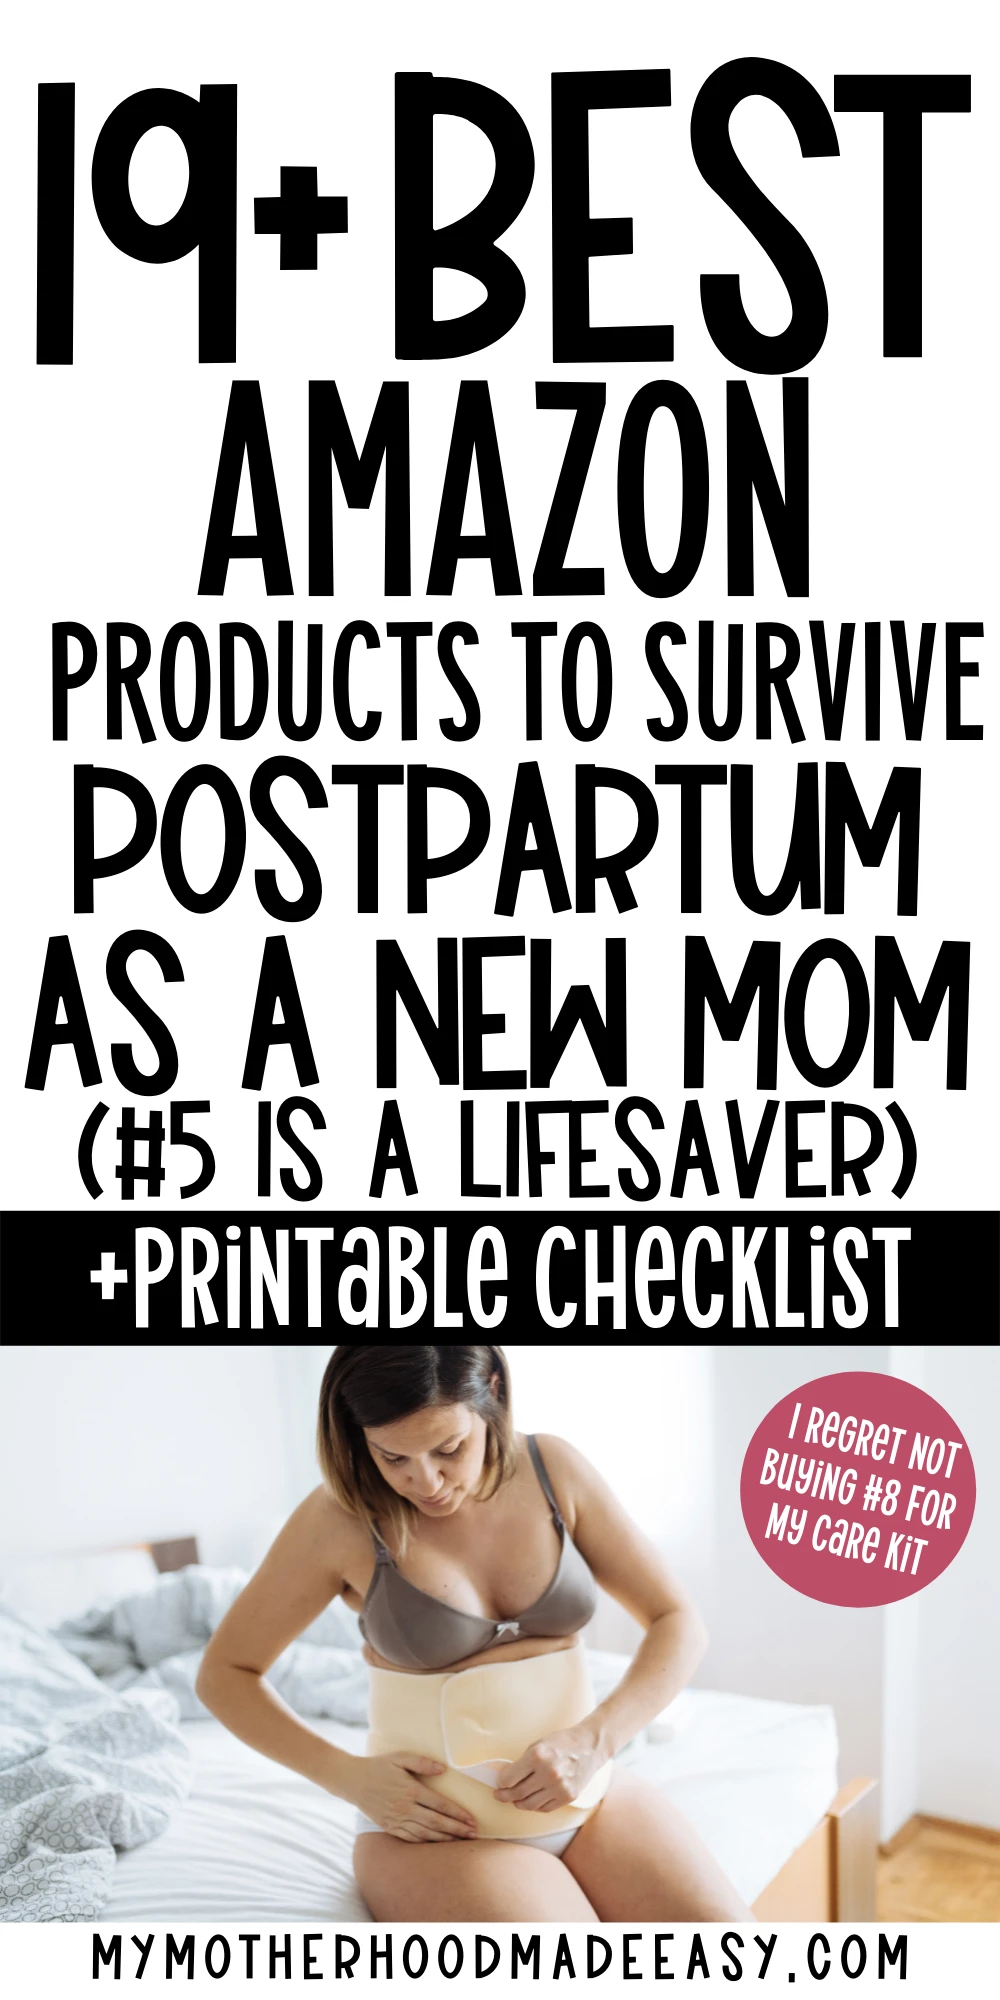 https://www.mymotherhoodmadeeasy.com/wp-content/uploads/2020/07/19-Best-Amazon-Products-to-Survive-the-4th-Trimester-.png.webp